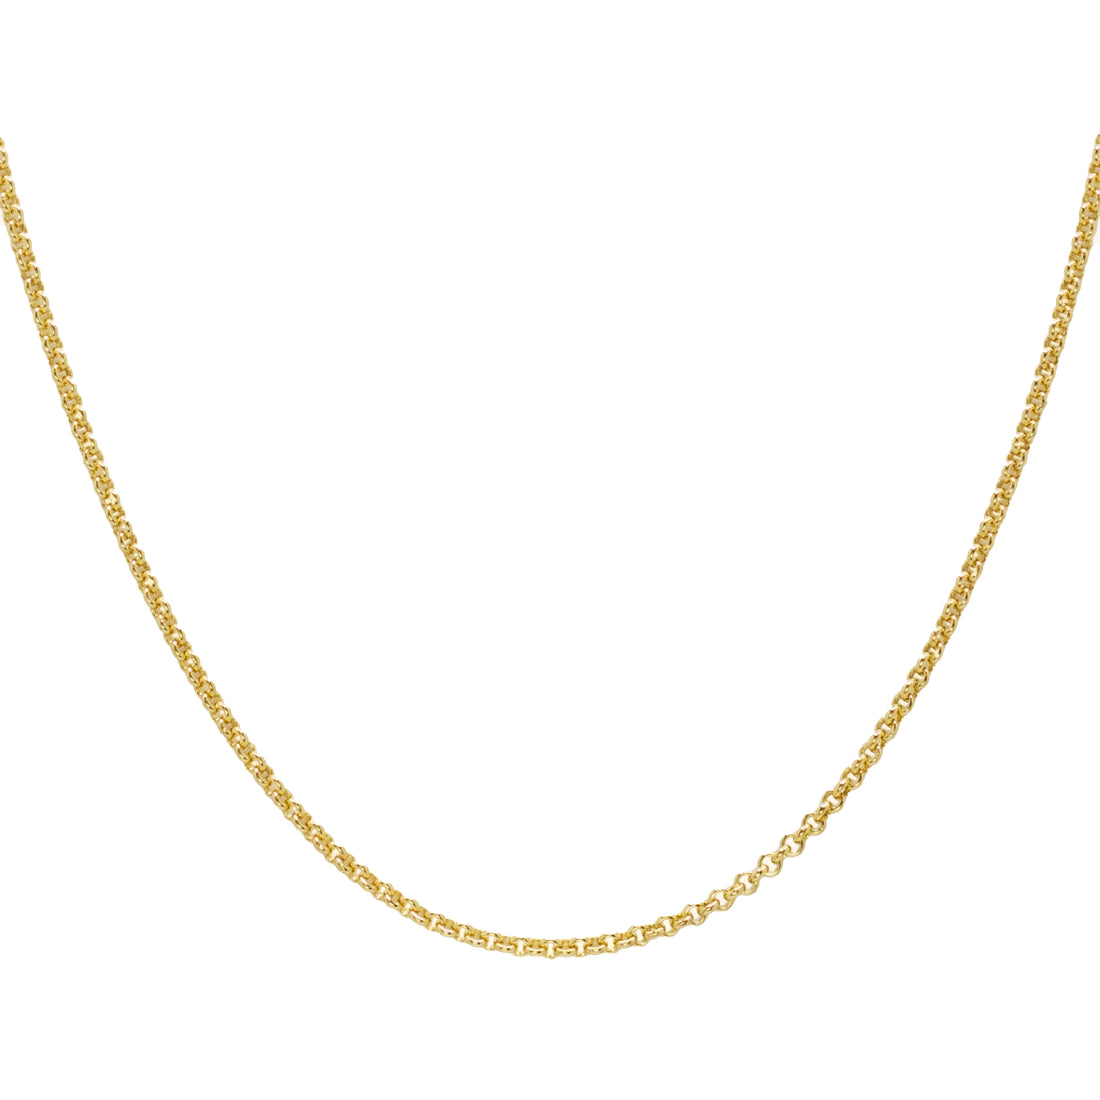 Gold Plated Sterling Silver Rolo Chain